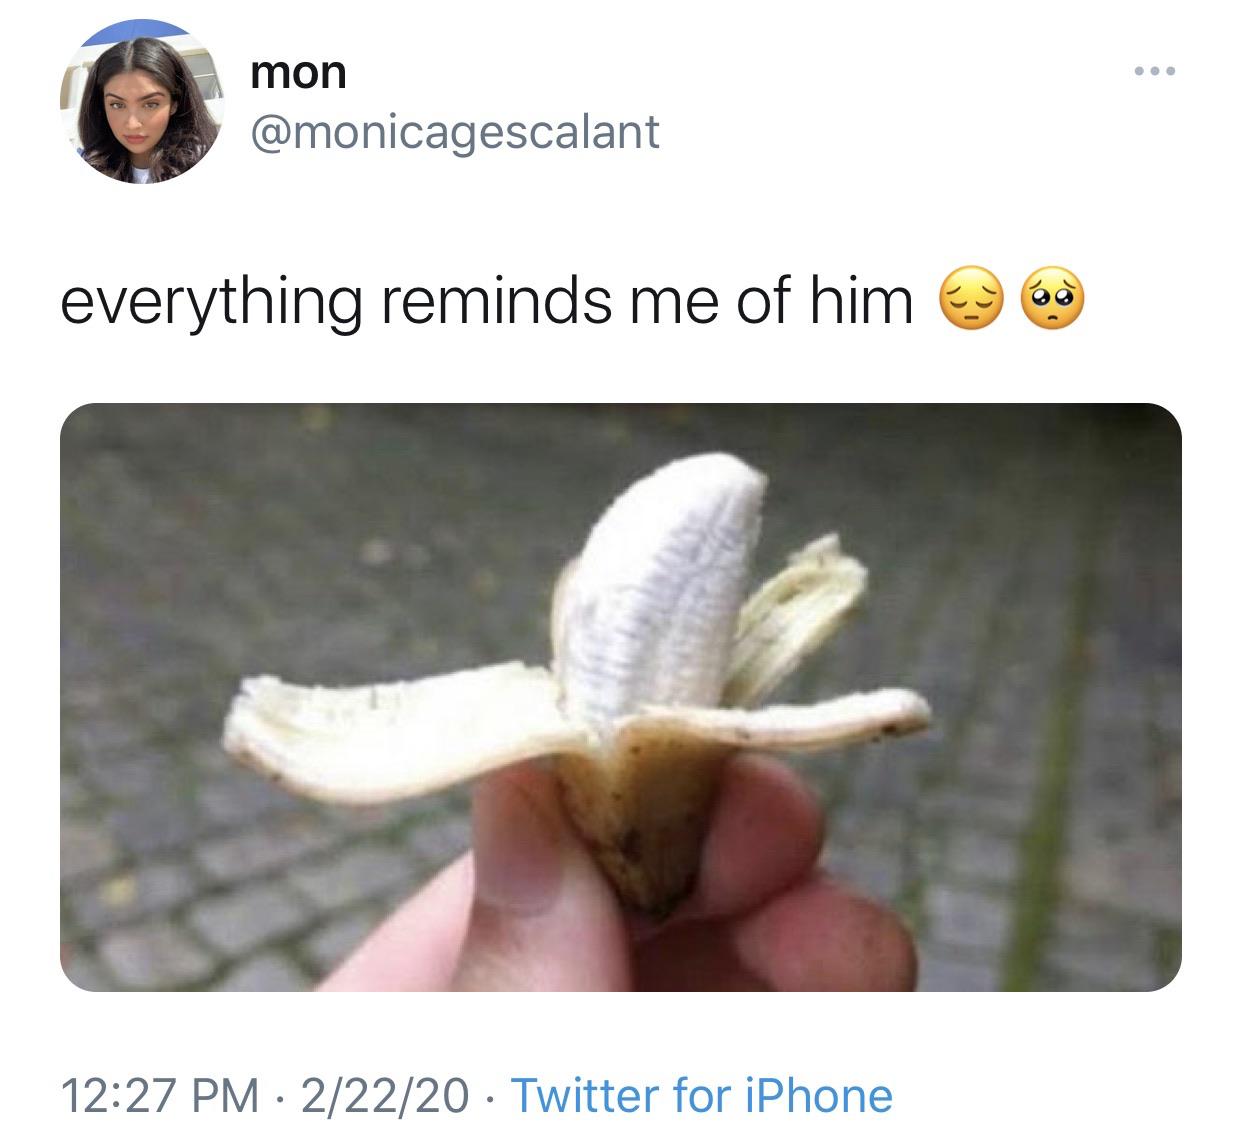 tiniest banana - mon everything reminds me of him 22220 Twitter for iPhone